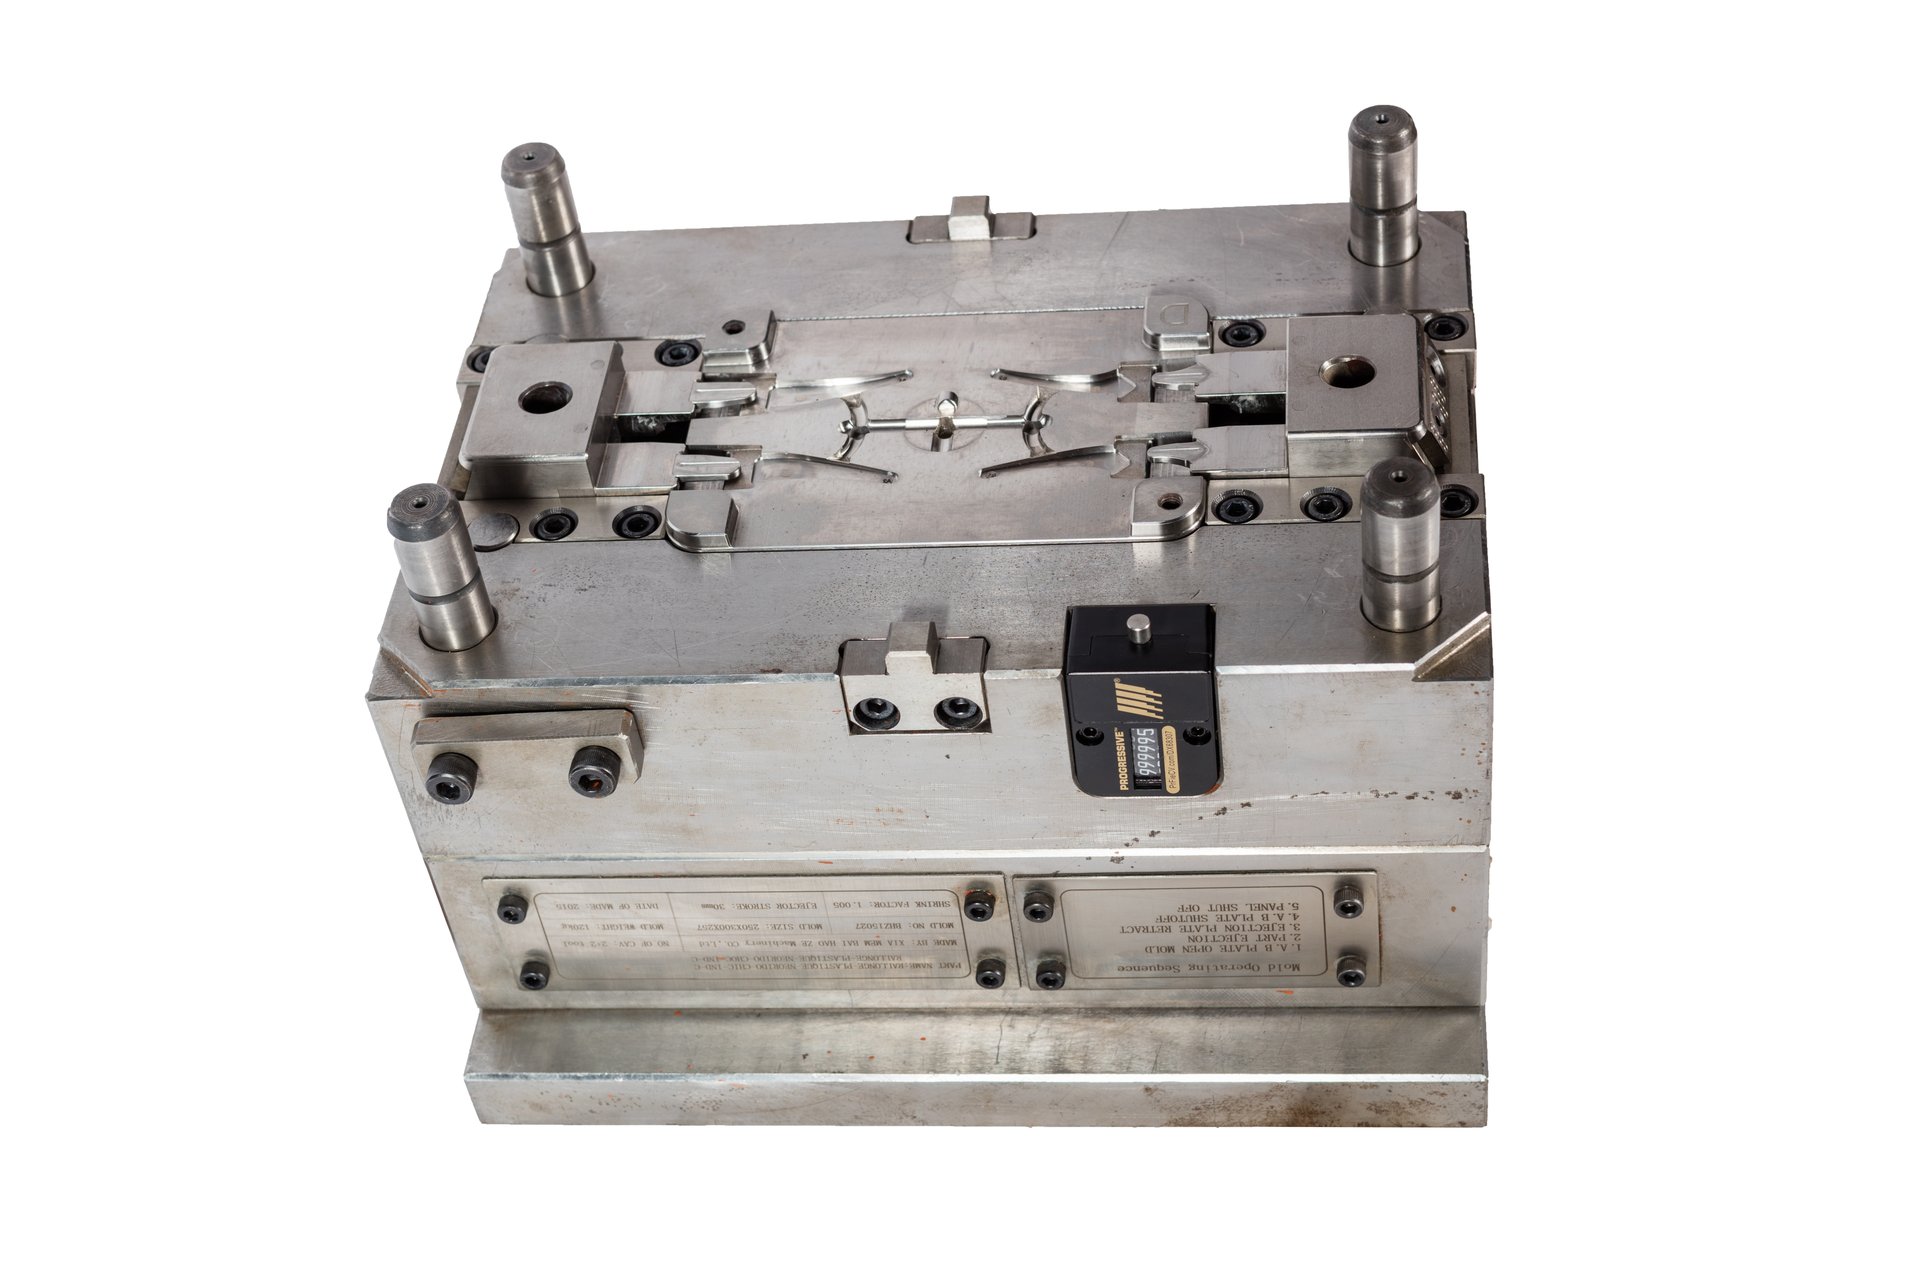 Injection Mold Services